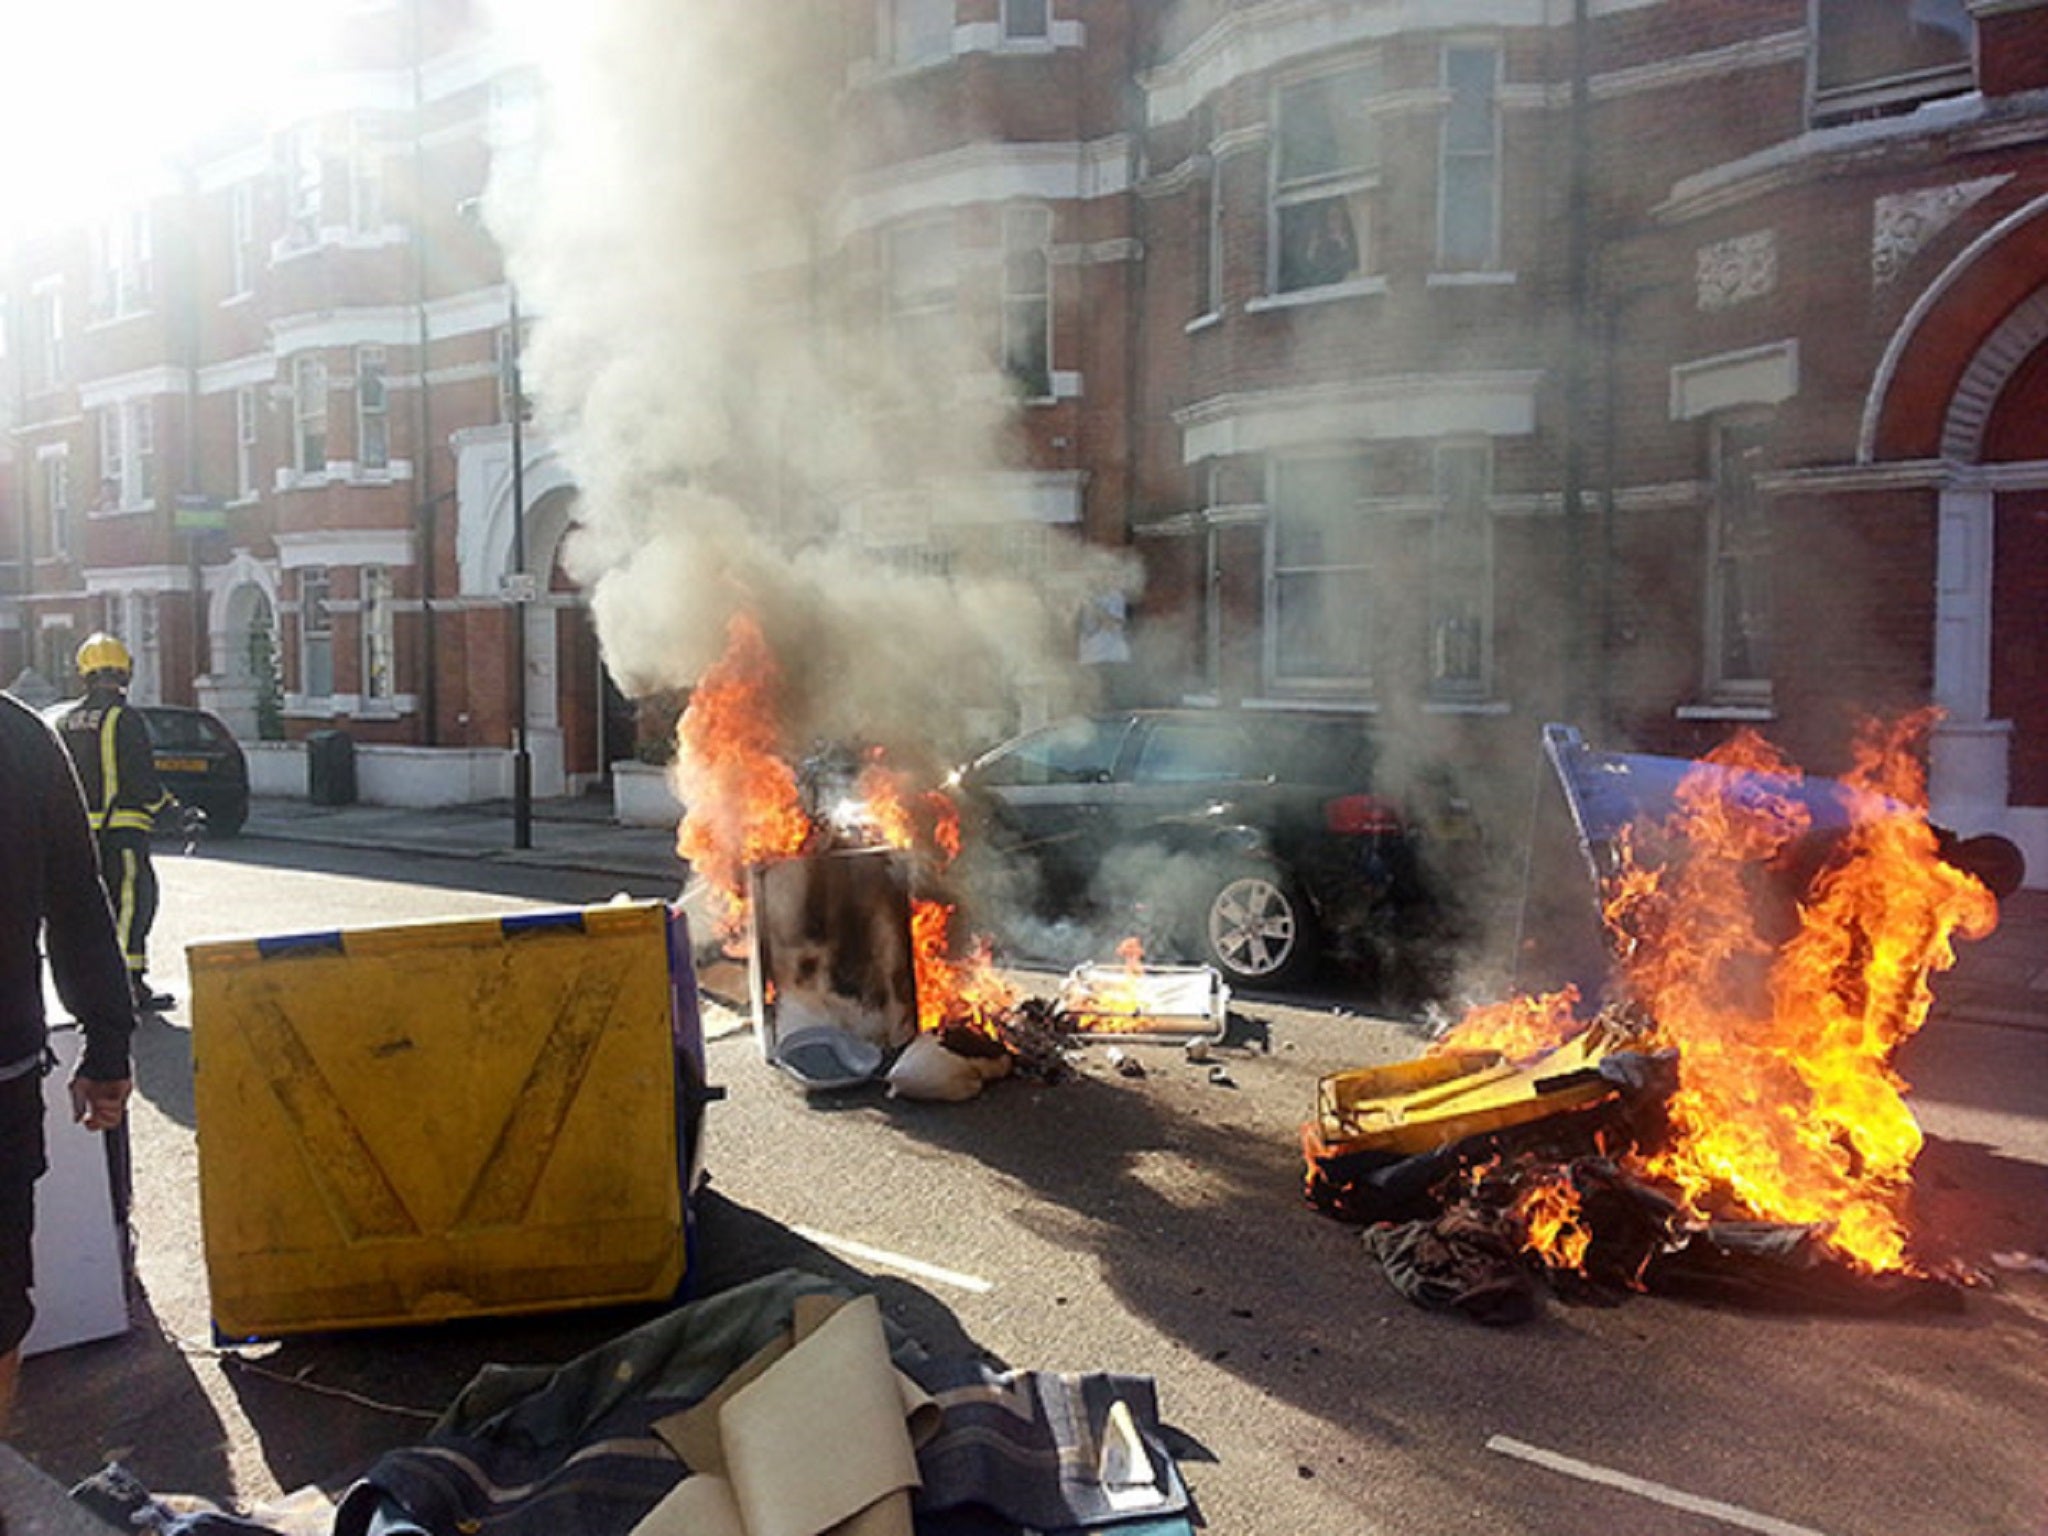 Furniture set ablaze by evicted squatters and protesters in 2013